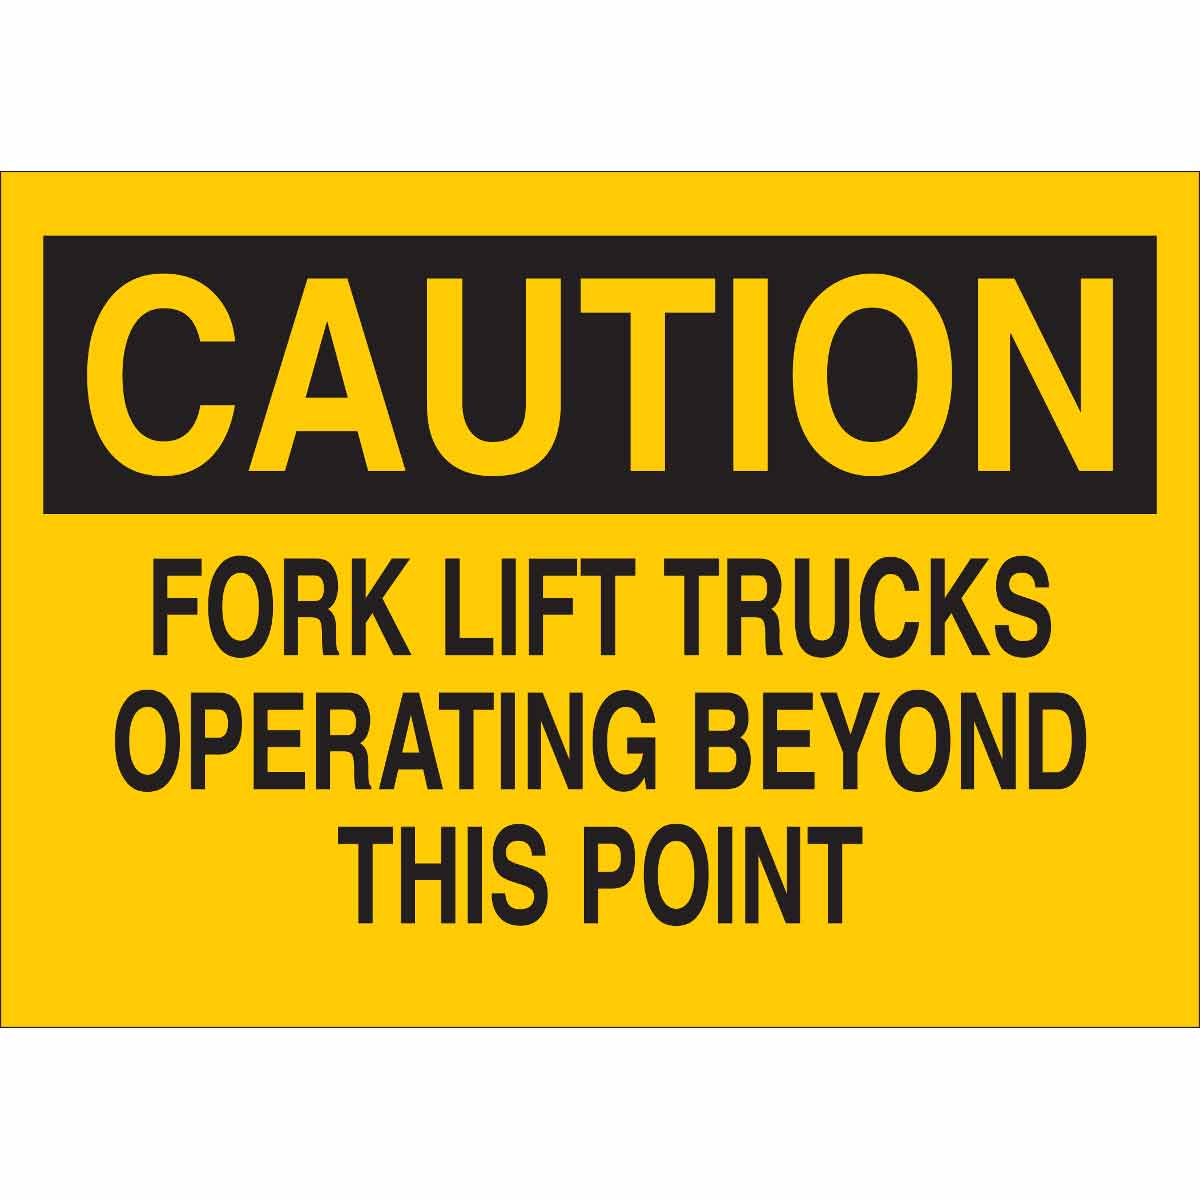 LegendNo Forklifts Allowed in This Area 10 Width 14 Height Brady 123843 Machine and Operational Sign Black and Red on White 